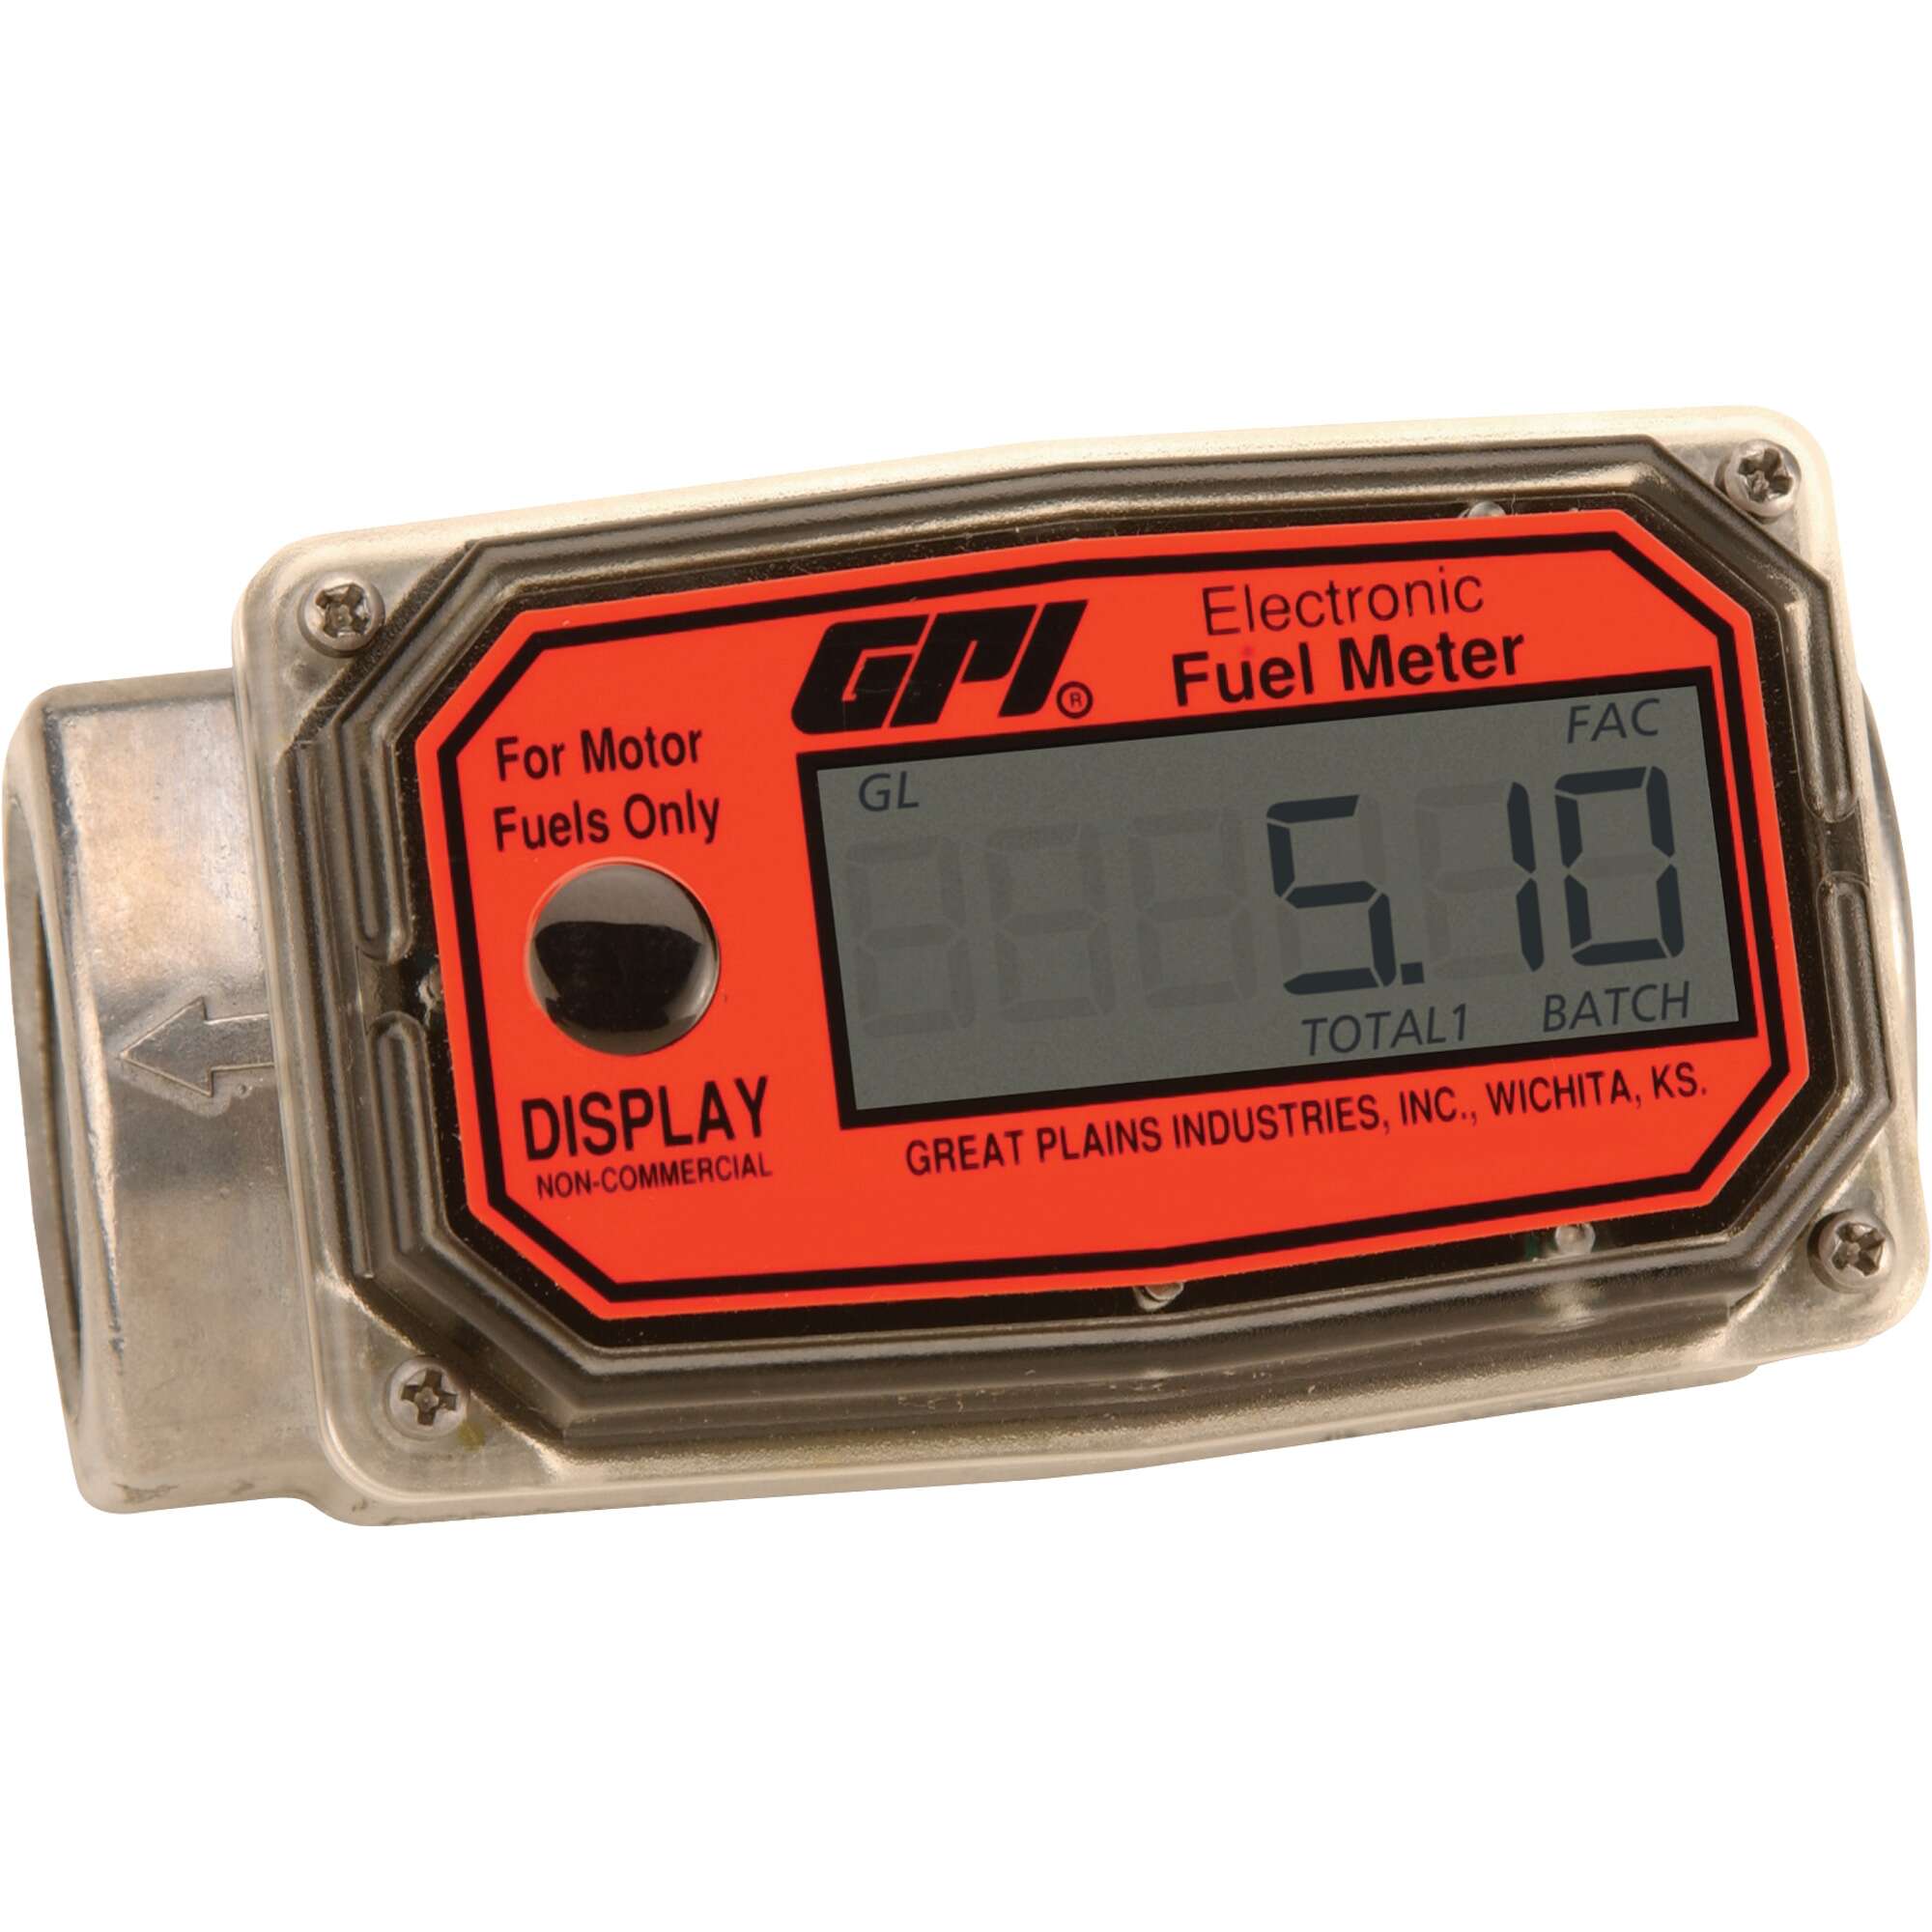 GPI Digital Fuel Meter 1in Inlet Outlet 3 to 30 GPM